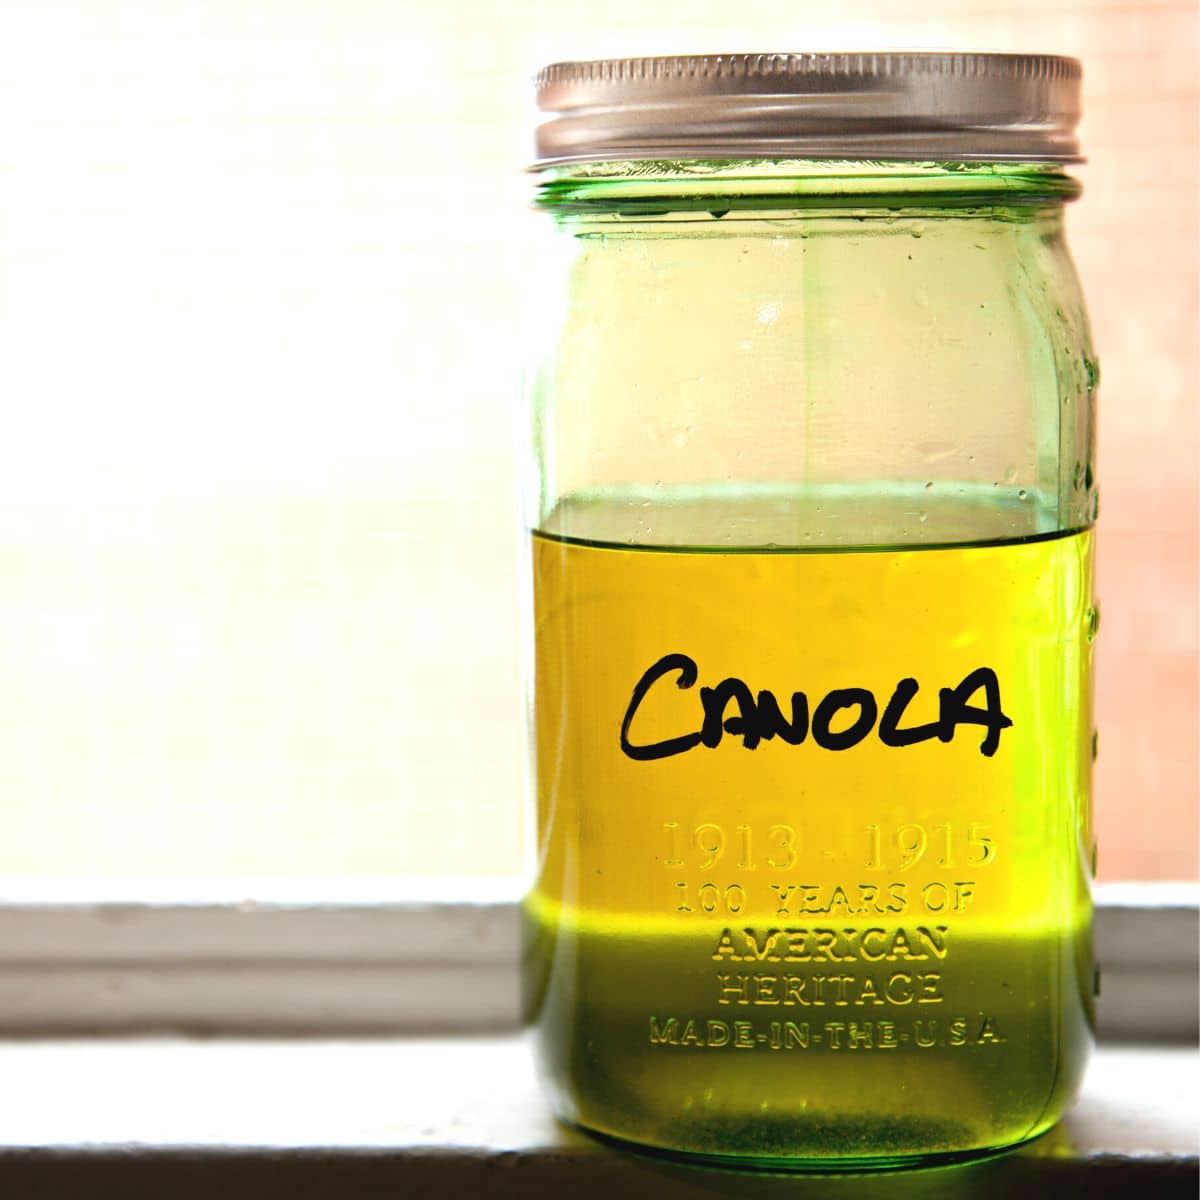 a jar of canola oil on a counter.